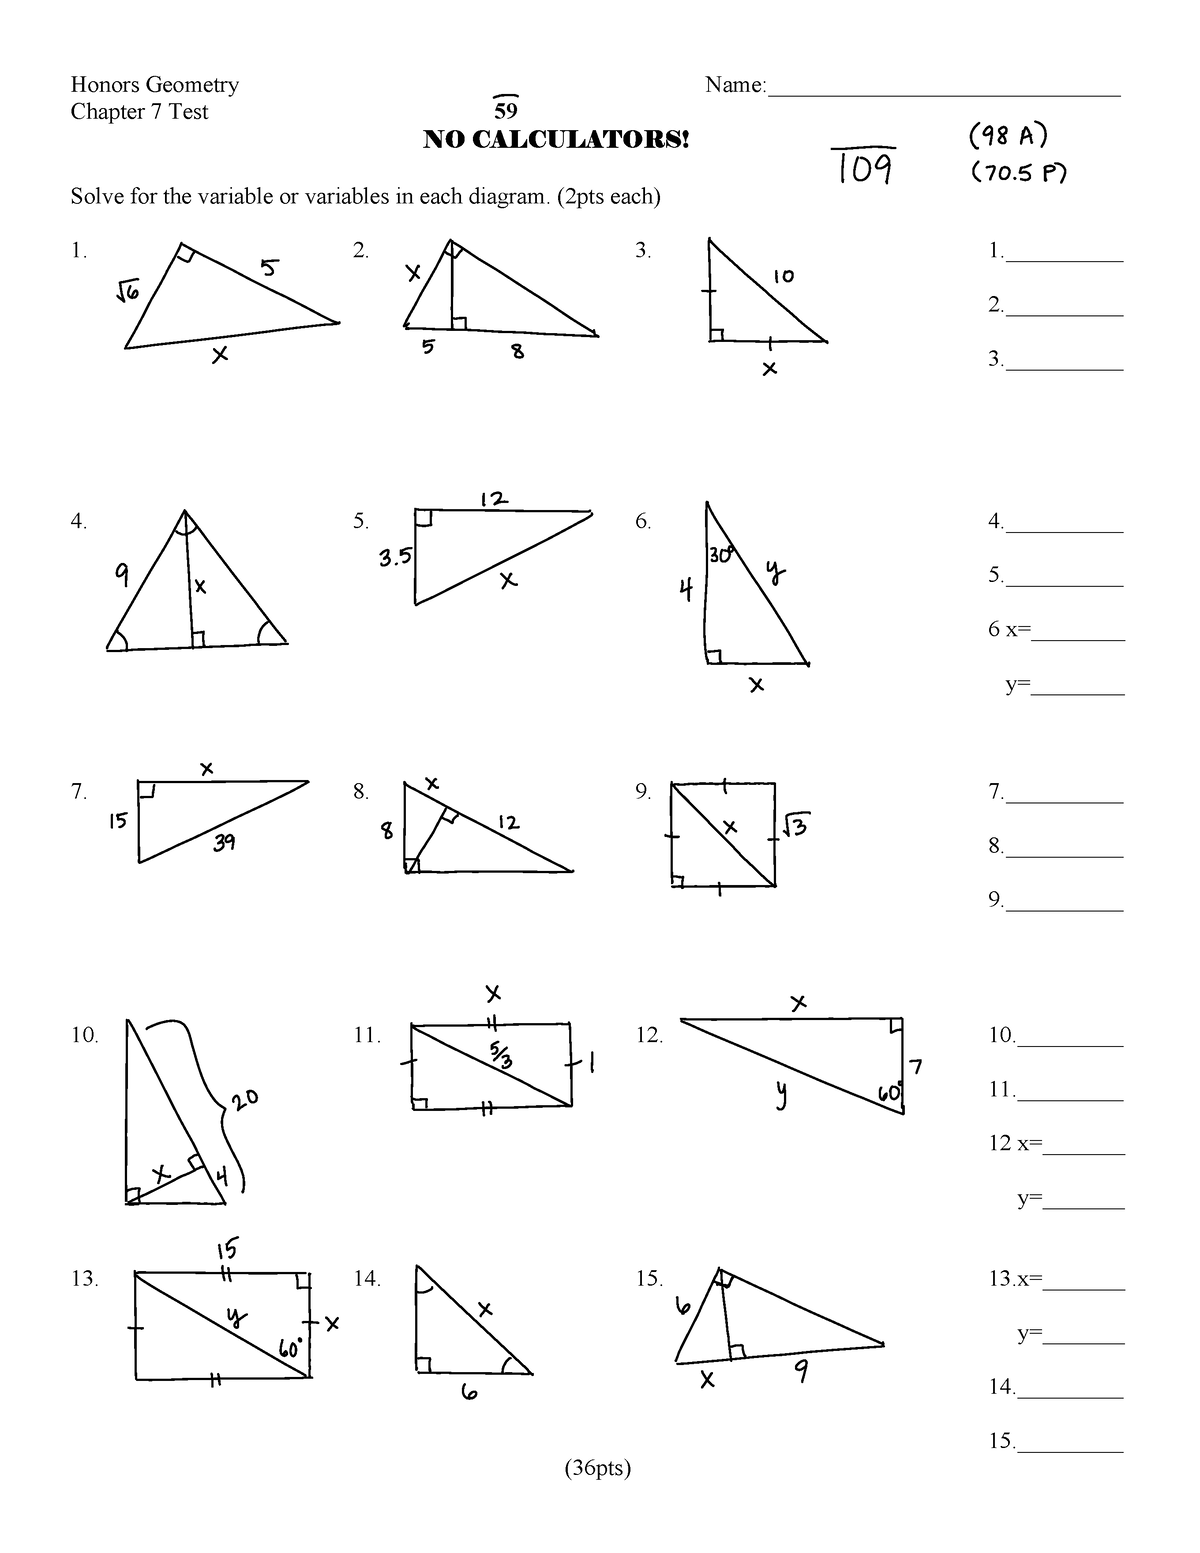 chapter-7practice-test-h-honors-geometry-name